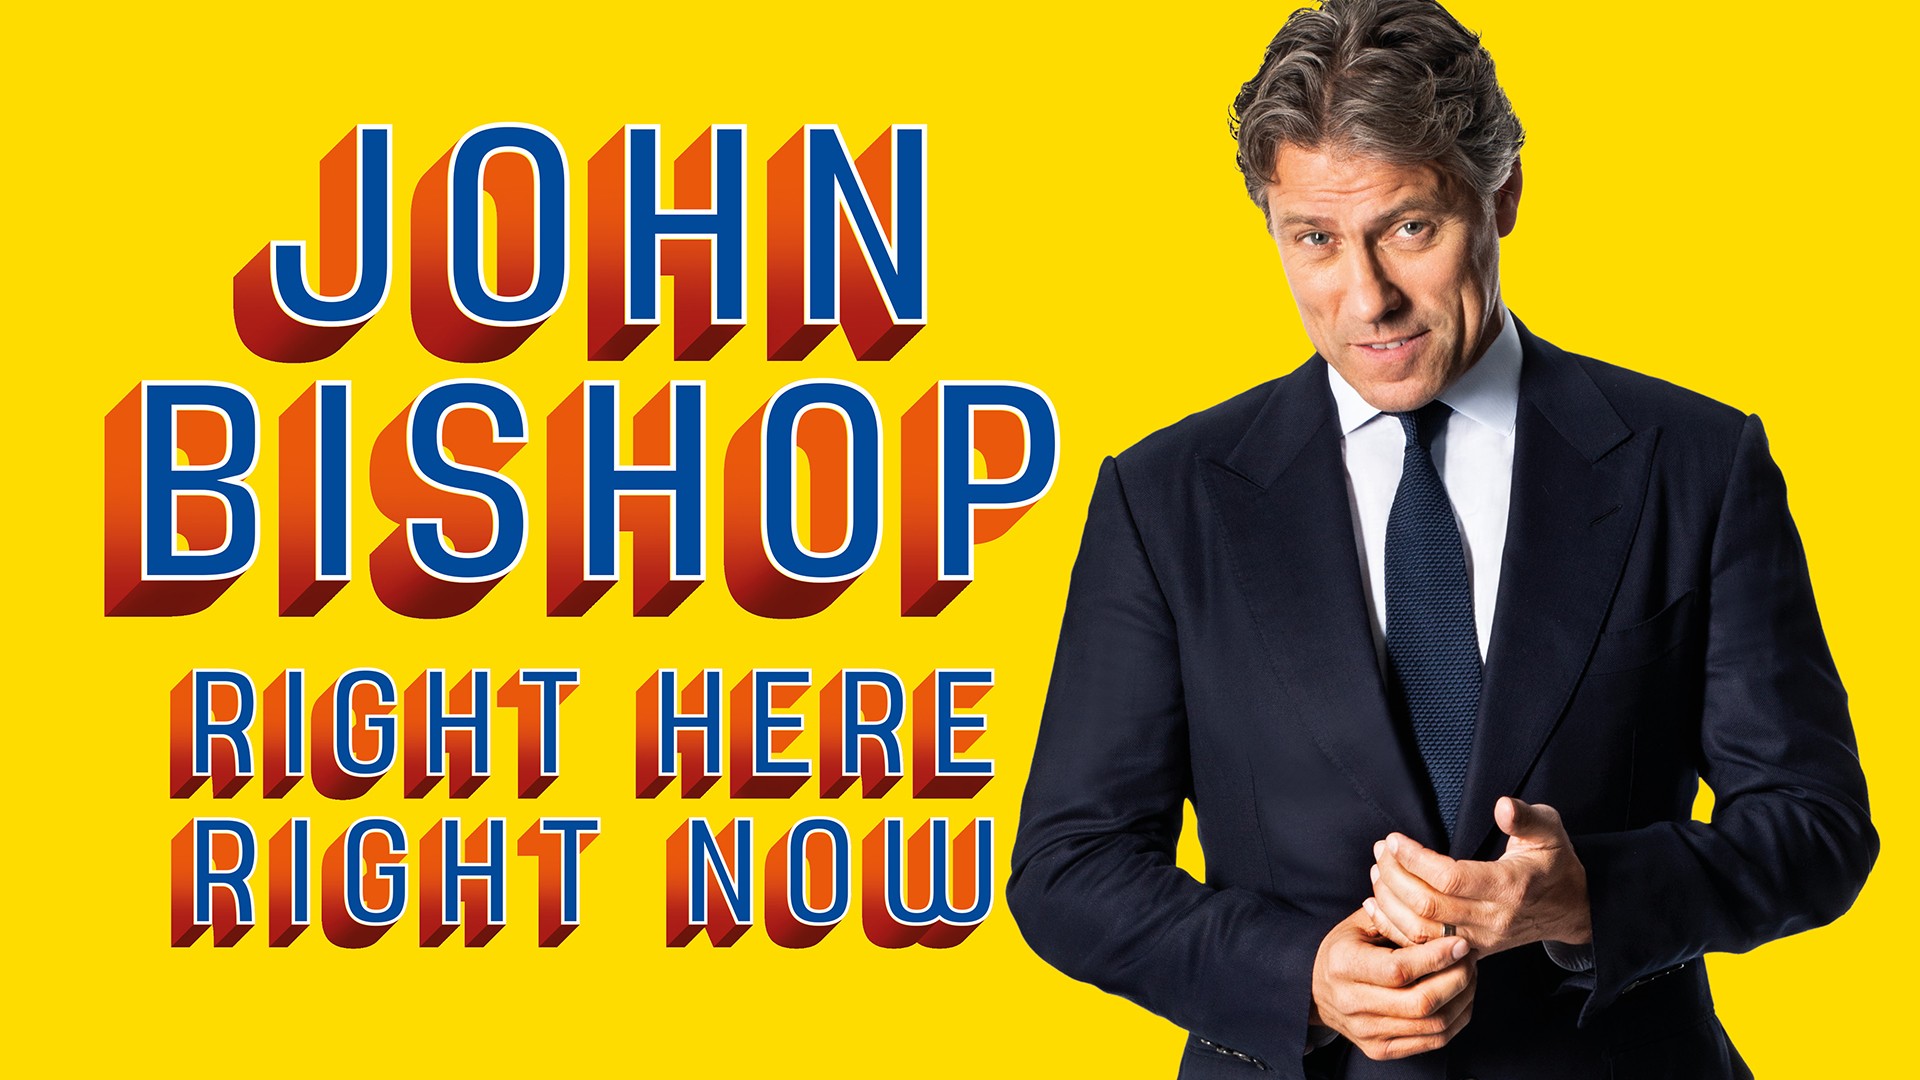 WIN TWO tickets to watch John Bishop's show - Right Here, Right Now